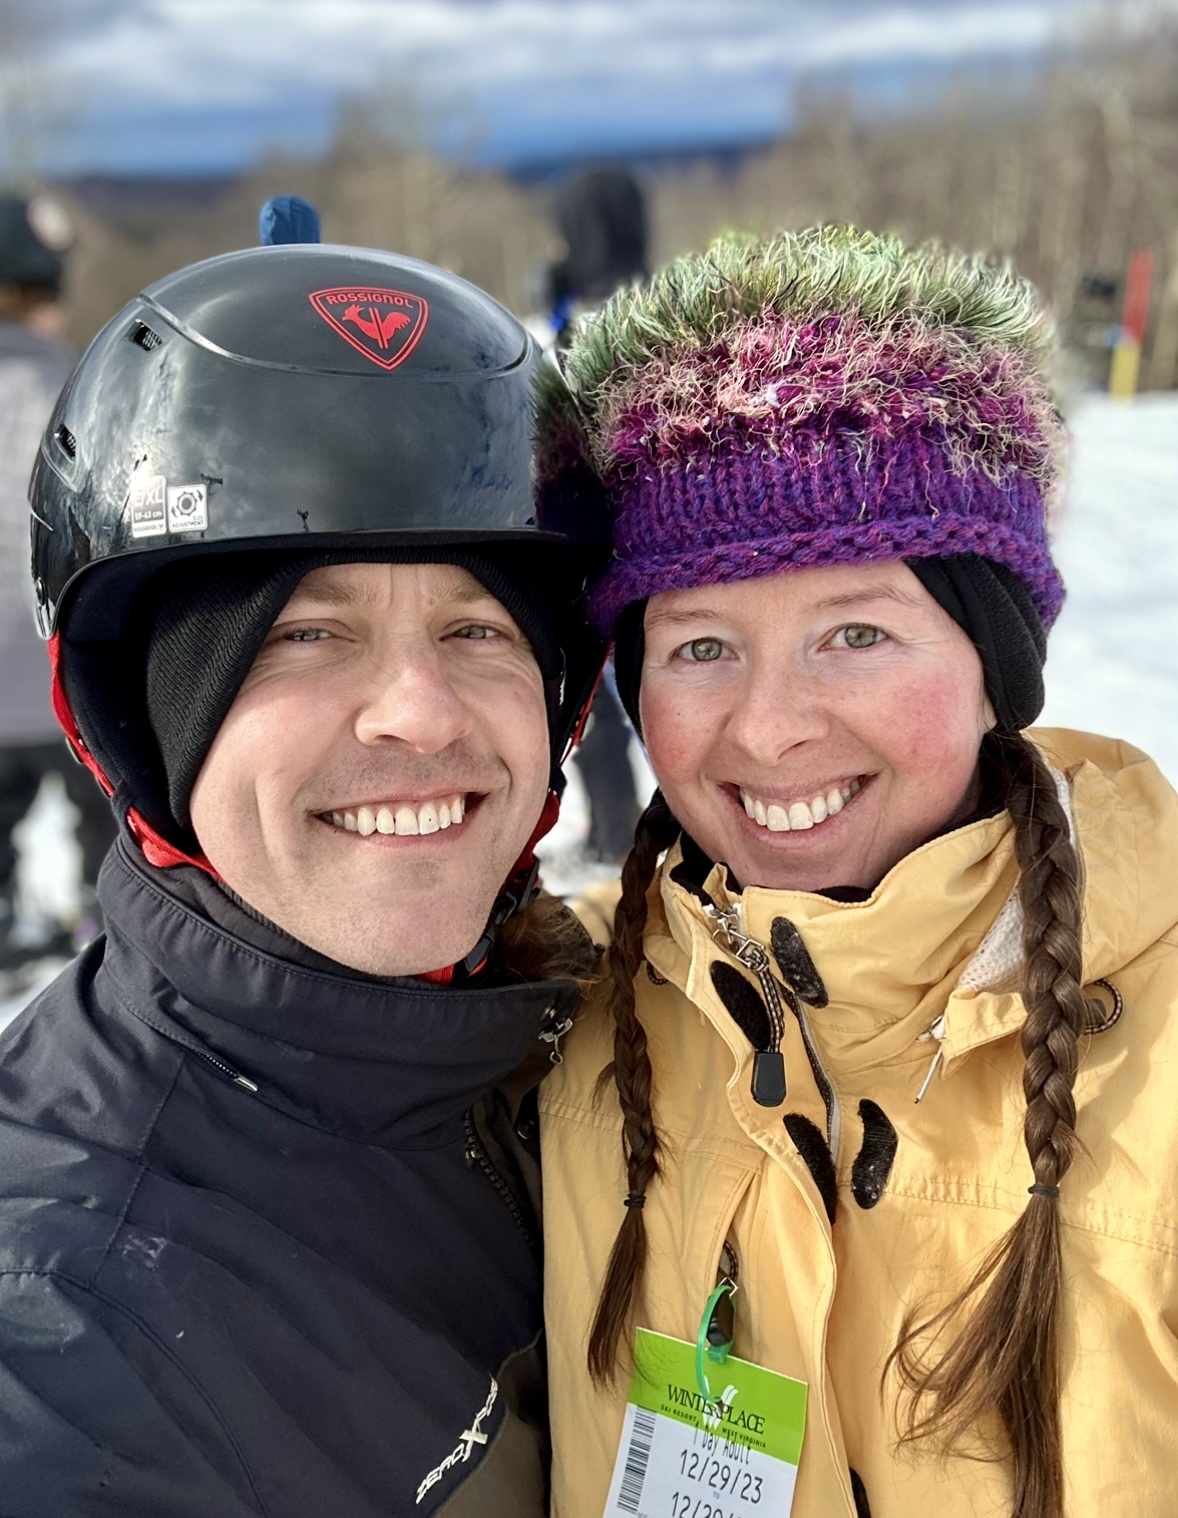 Summit couples selfie at Winterplace Conquering the peak with a triumphant smile! (Road Trip)